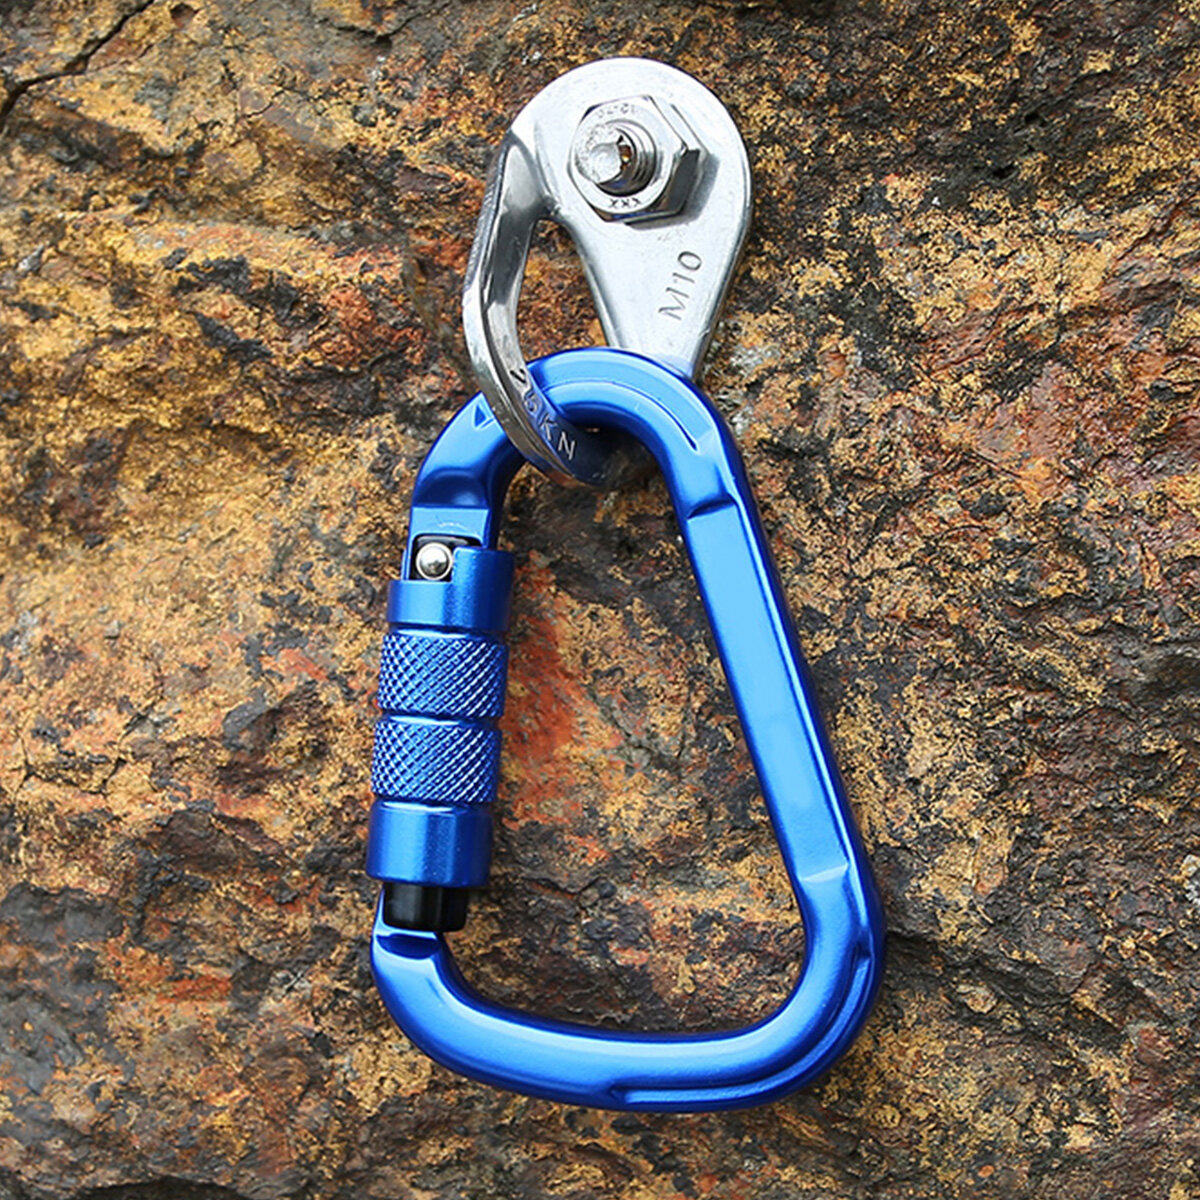 Outdoor Rock Carabiner 25KN Safety Connector Lock Aluminum alloy Spring-loaded Gate Buckle Survive Equipment